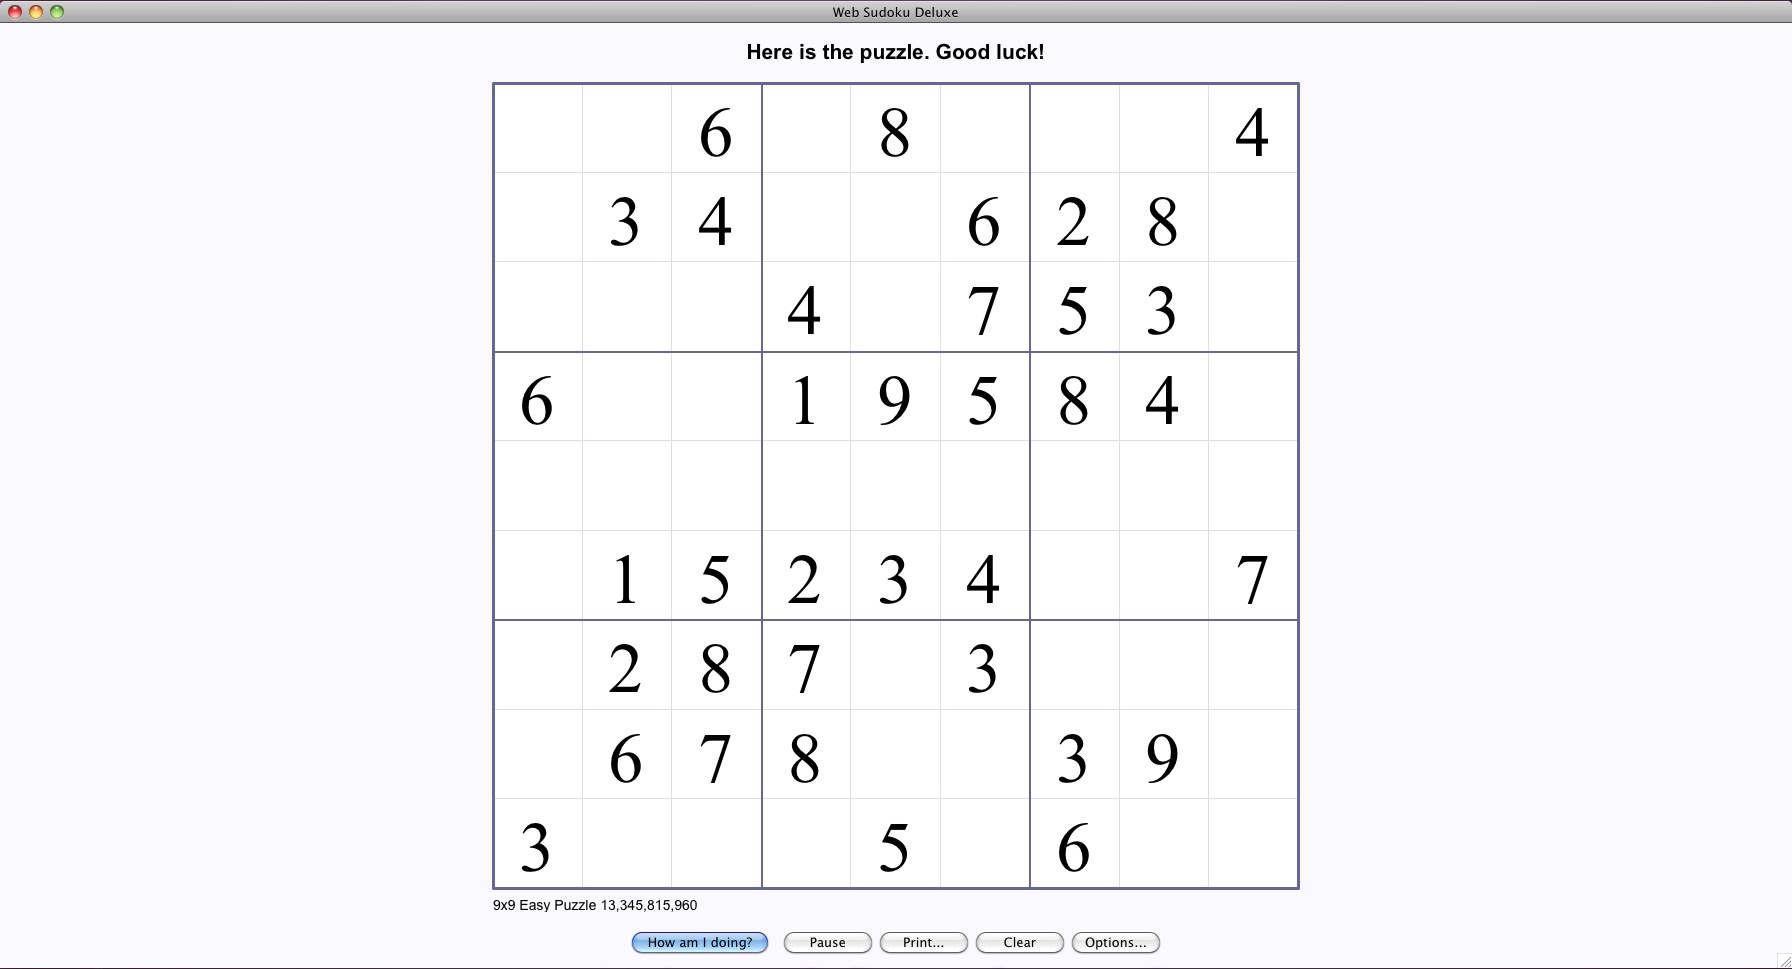 Web Sudoku Deluxe 1.2 : General view